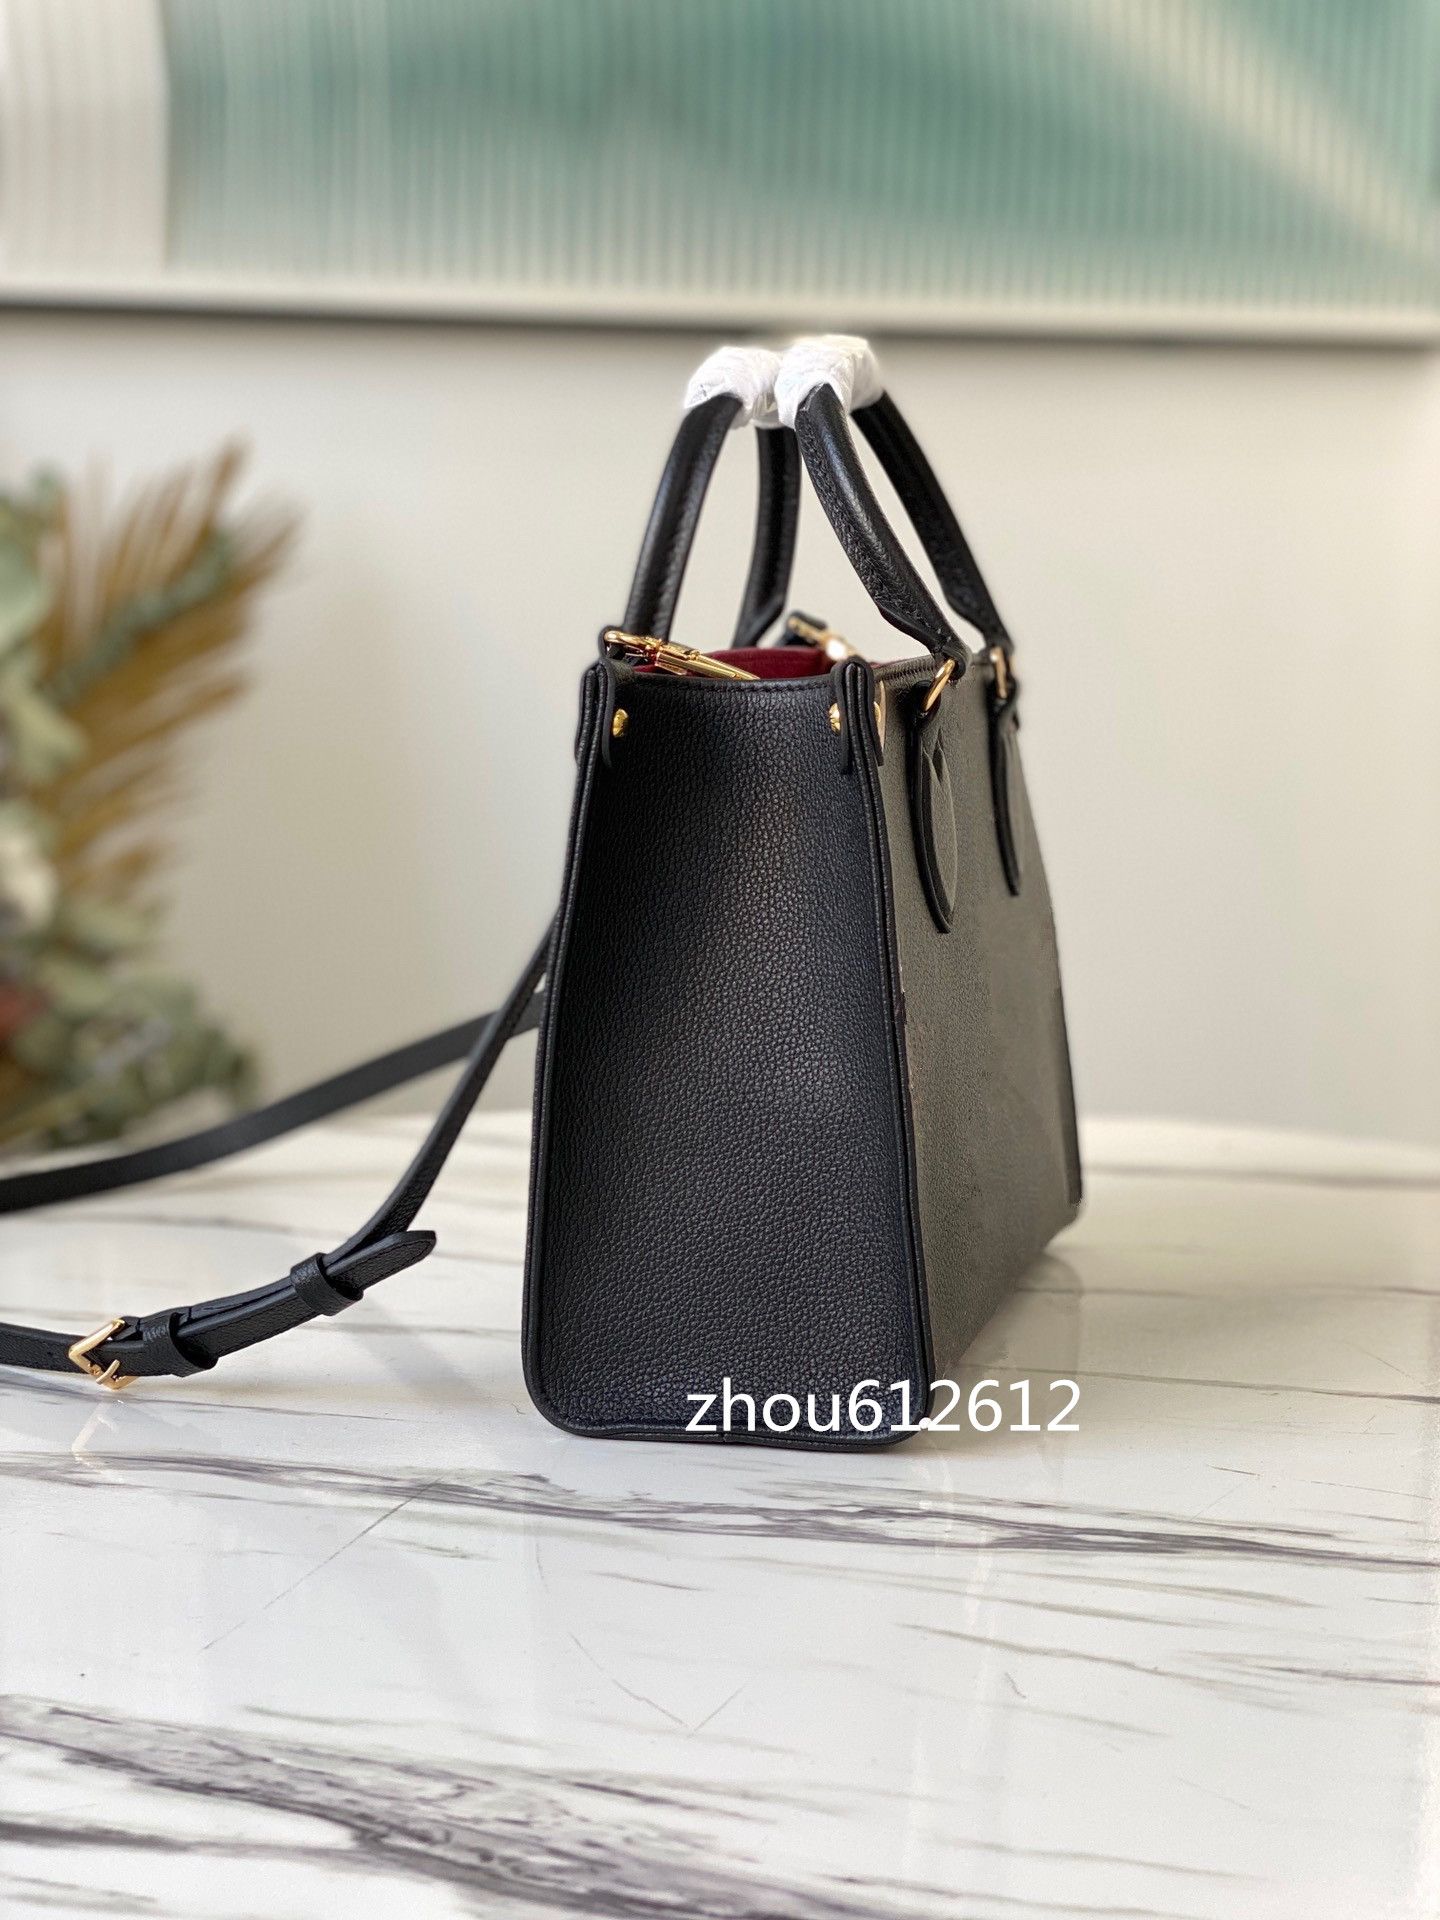 TOP. M46373 ONTHEGO PM TOTE Shopping Bag Wholesale Designer Handbag Bags  Purse Hobo Wallet Evening Backpack From Join2, $226.95